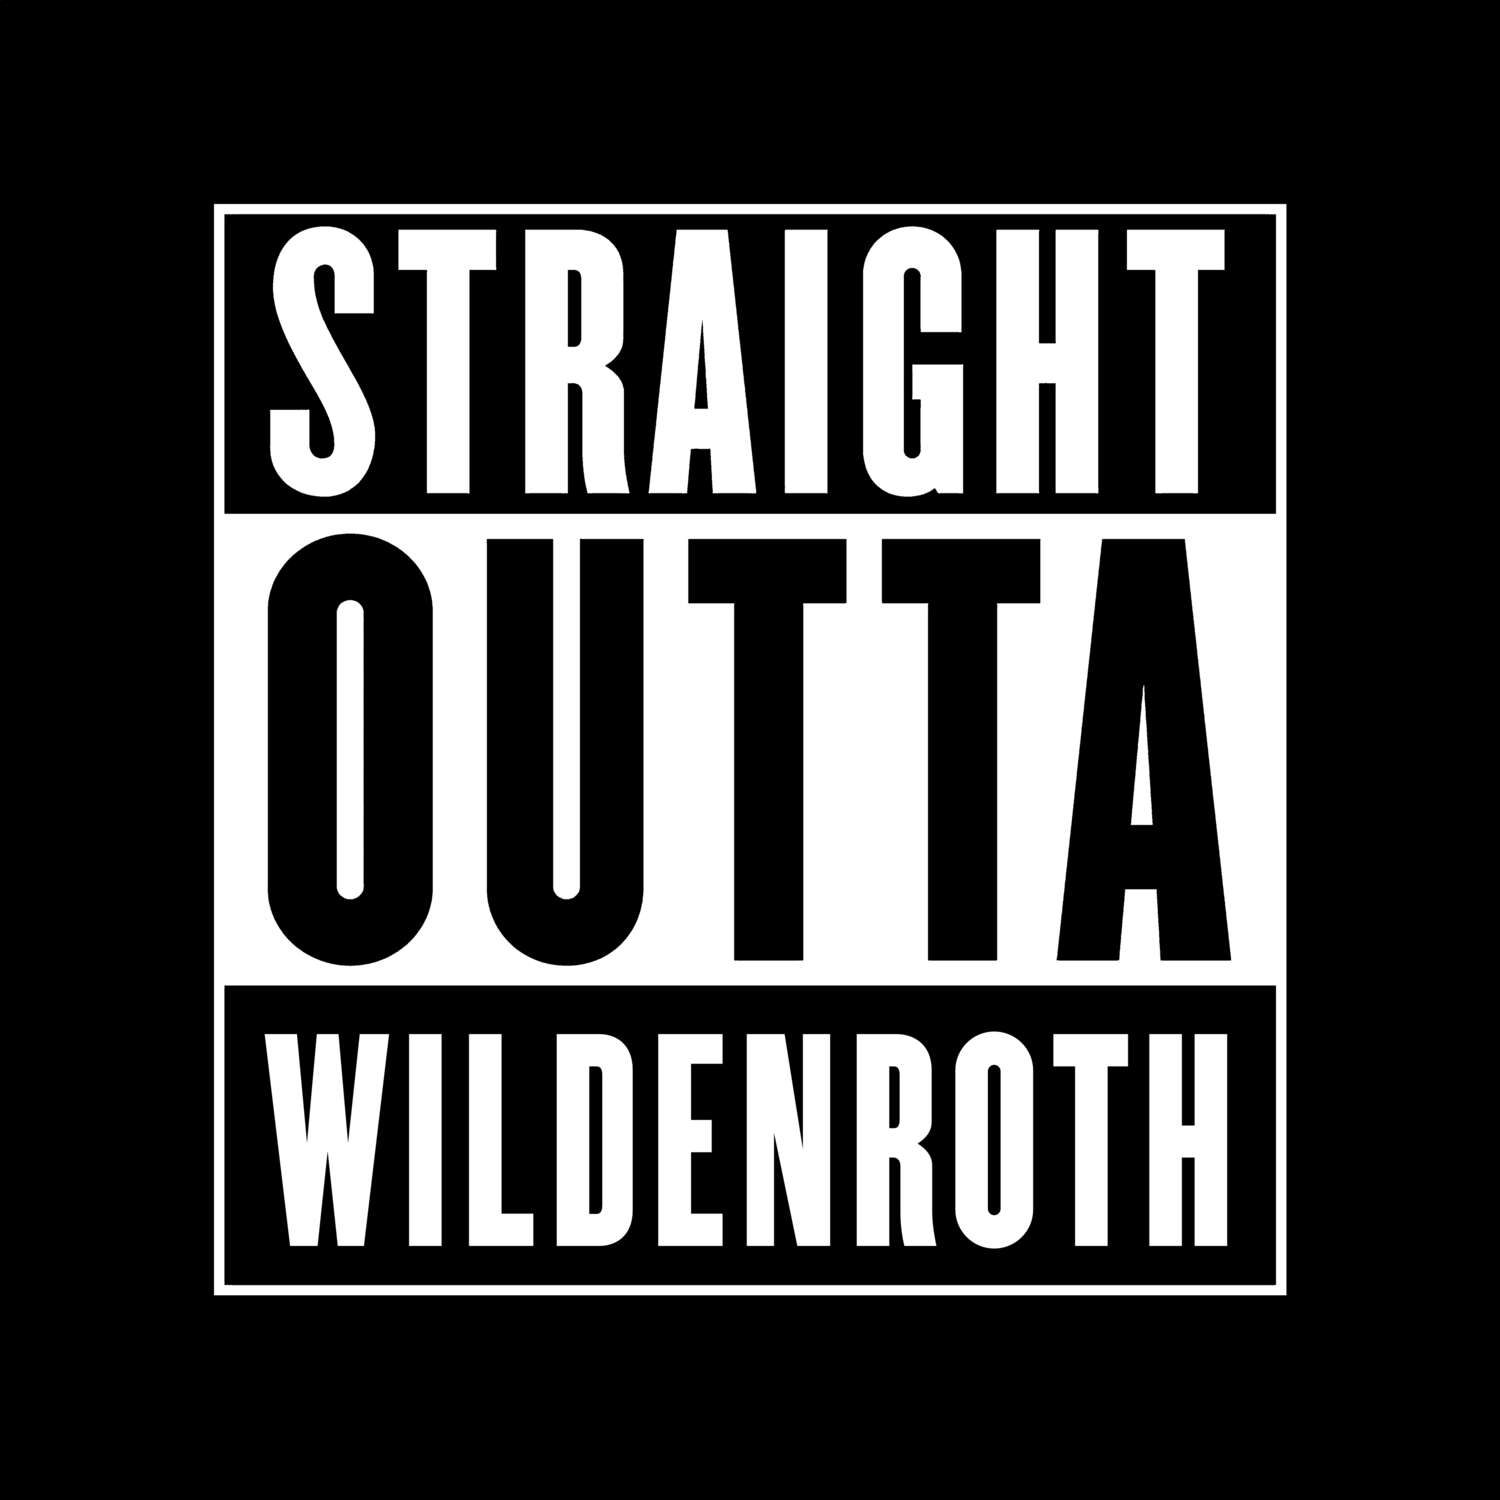 Wildenroth T-Shirt »Straight Outta«